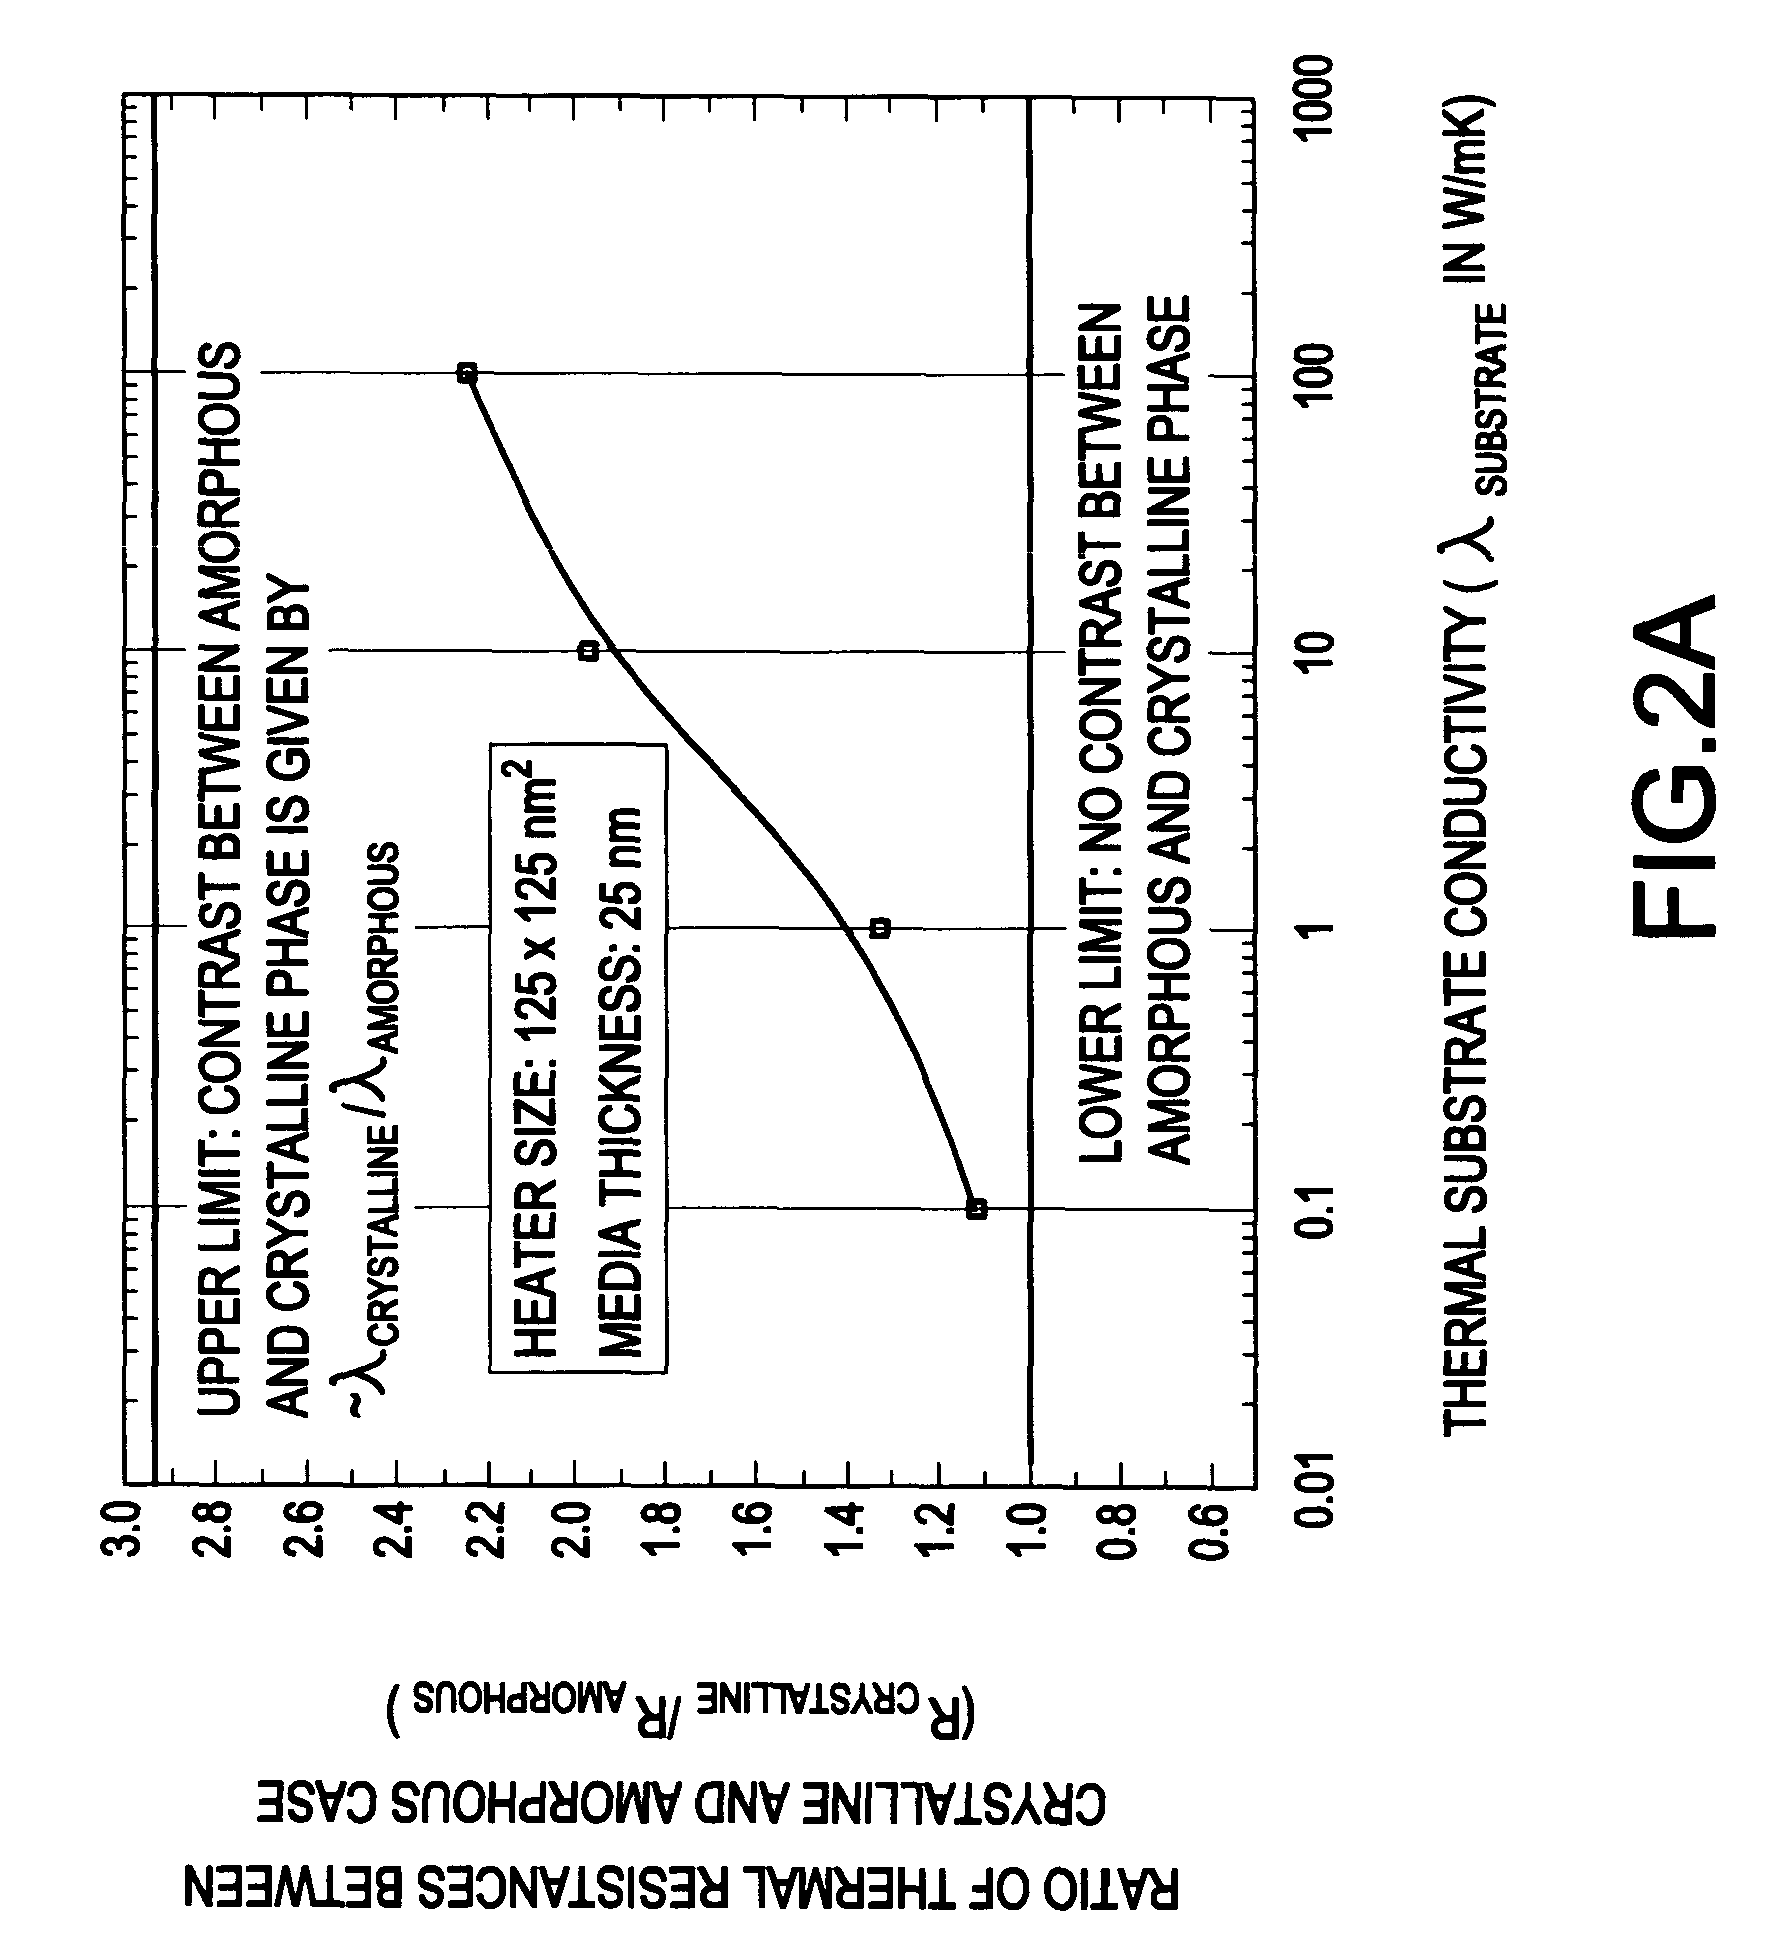 Thermal memory cell and memory device including the thermal memory cell